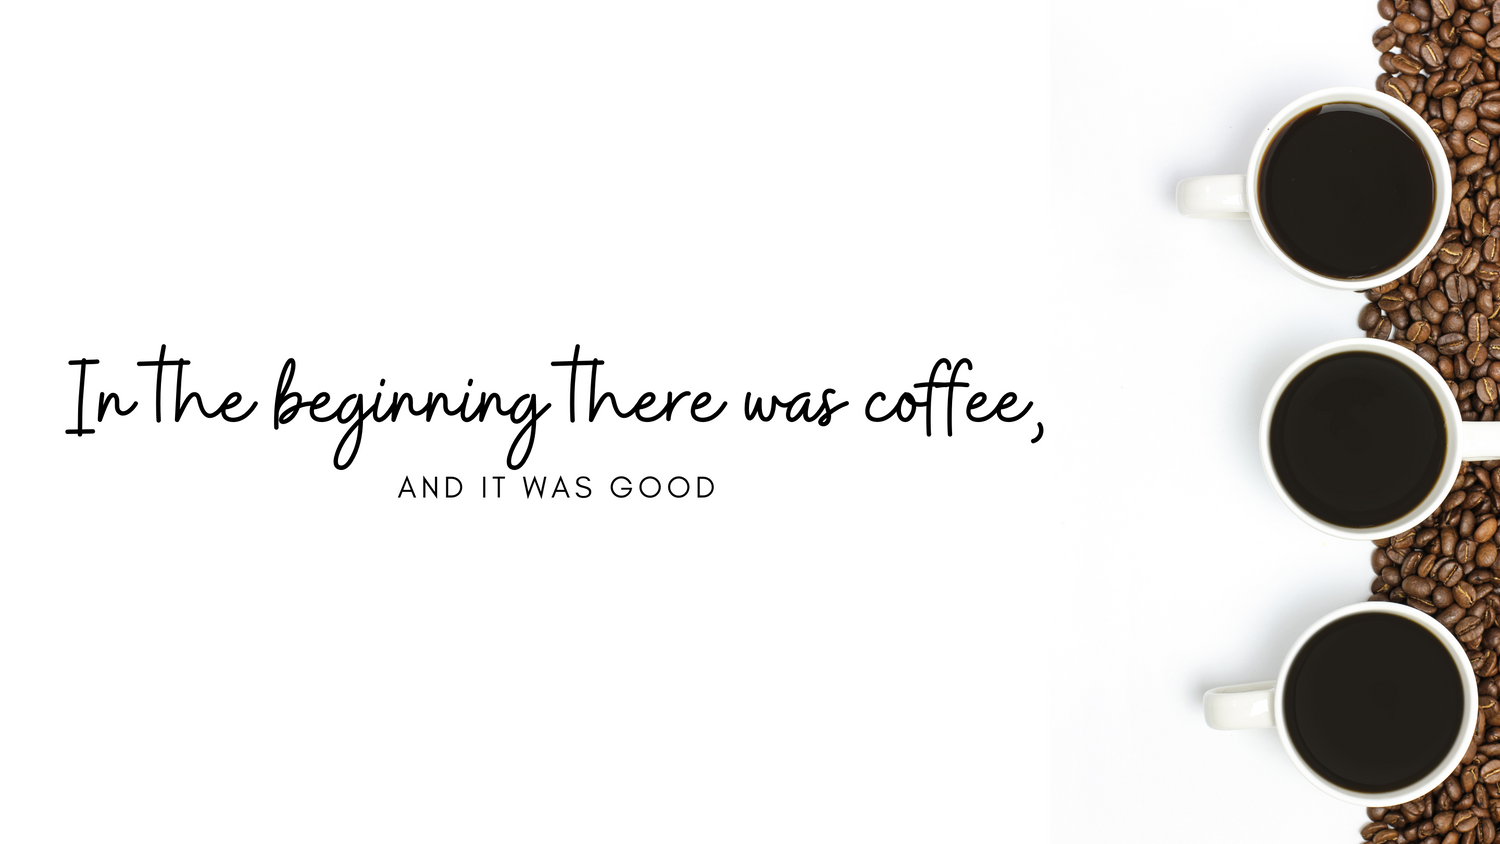 In the beginning there was coffee and it was good - Genesis Coffee Roasters